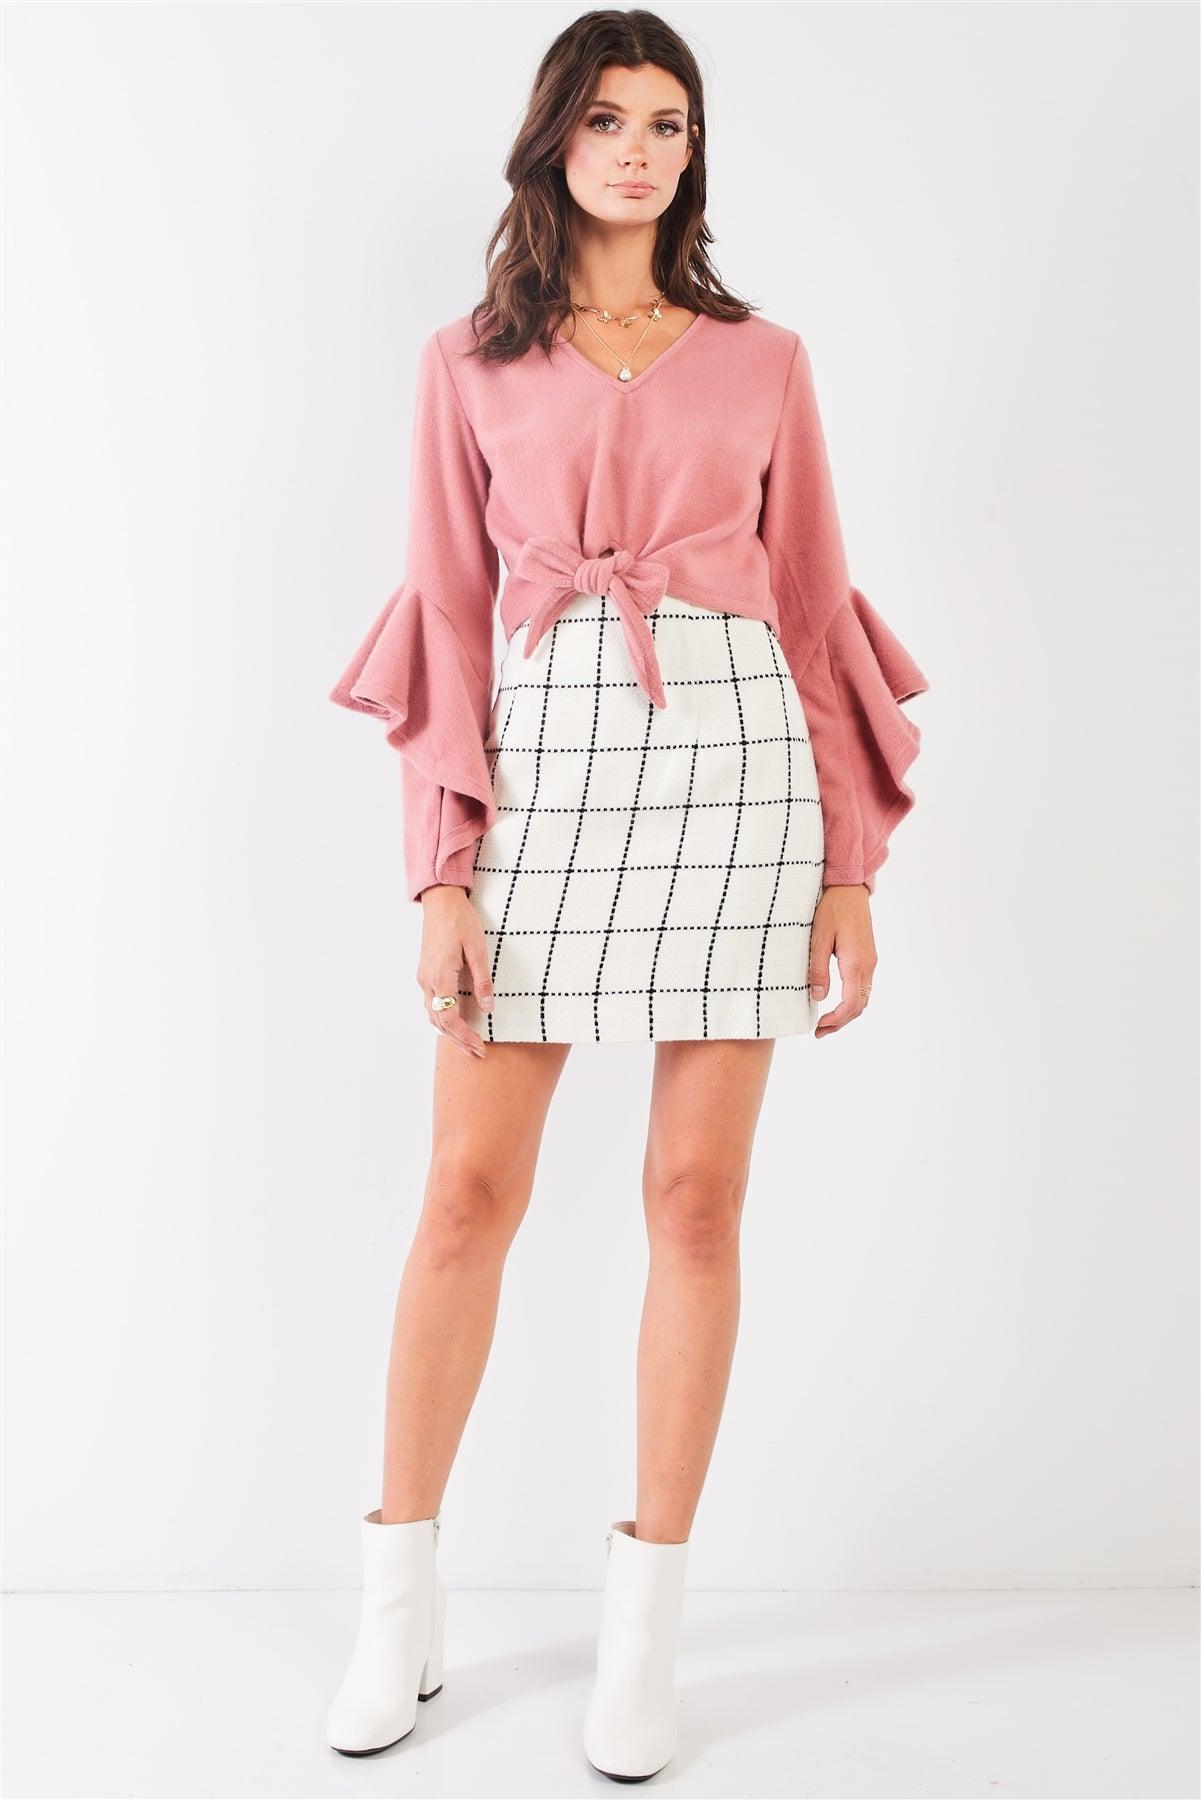 Blush Fuzzy Long Ruffle Sleeve V-Neck Self-Tie Front Detail Cropped Top /2-1-3